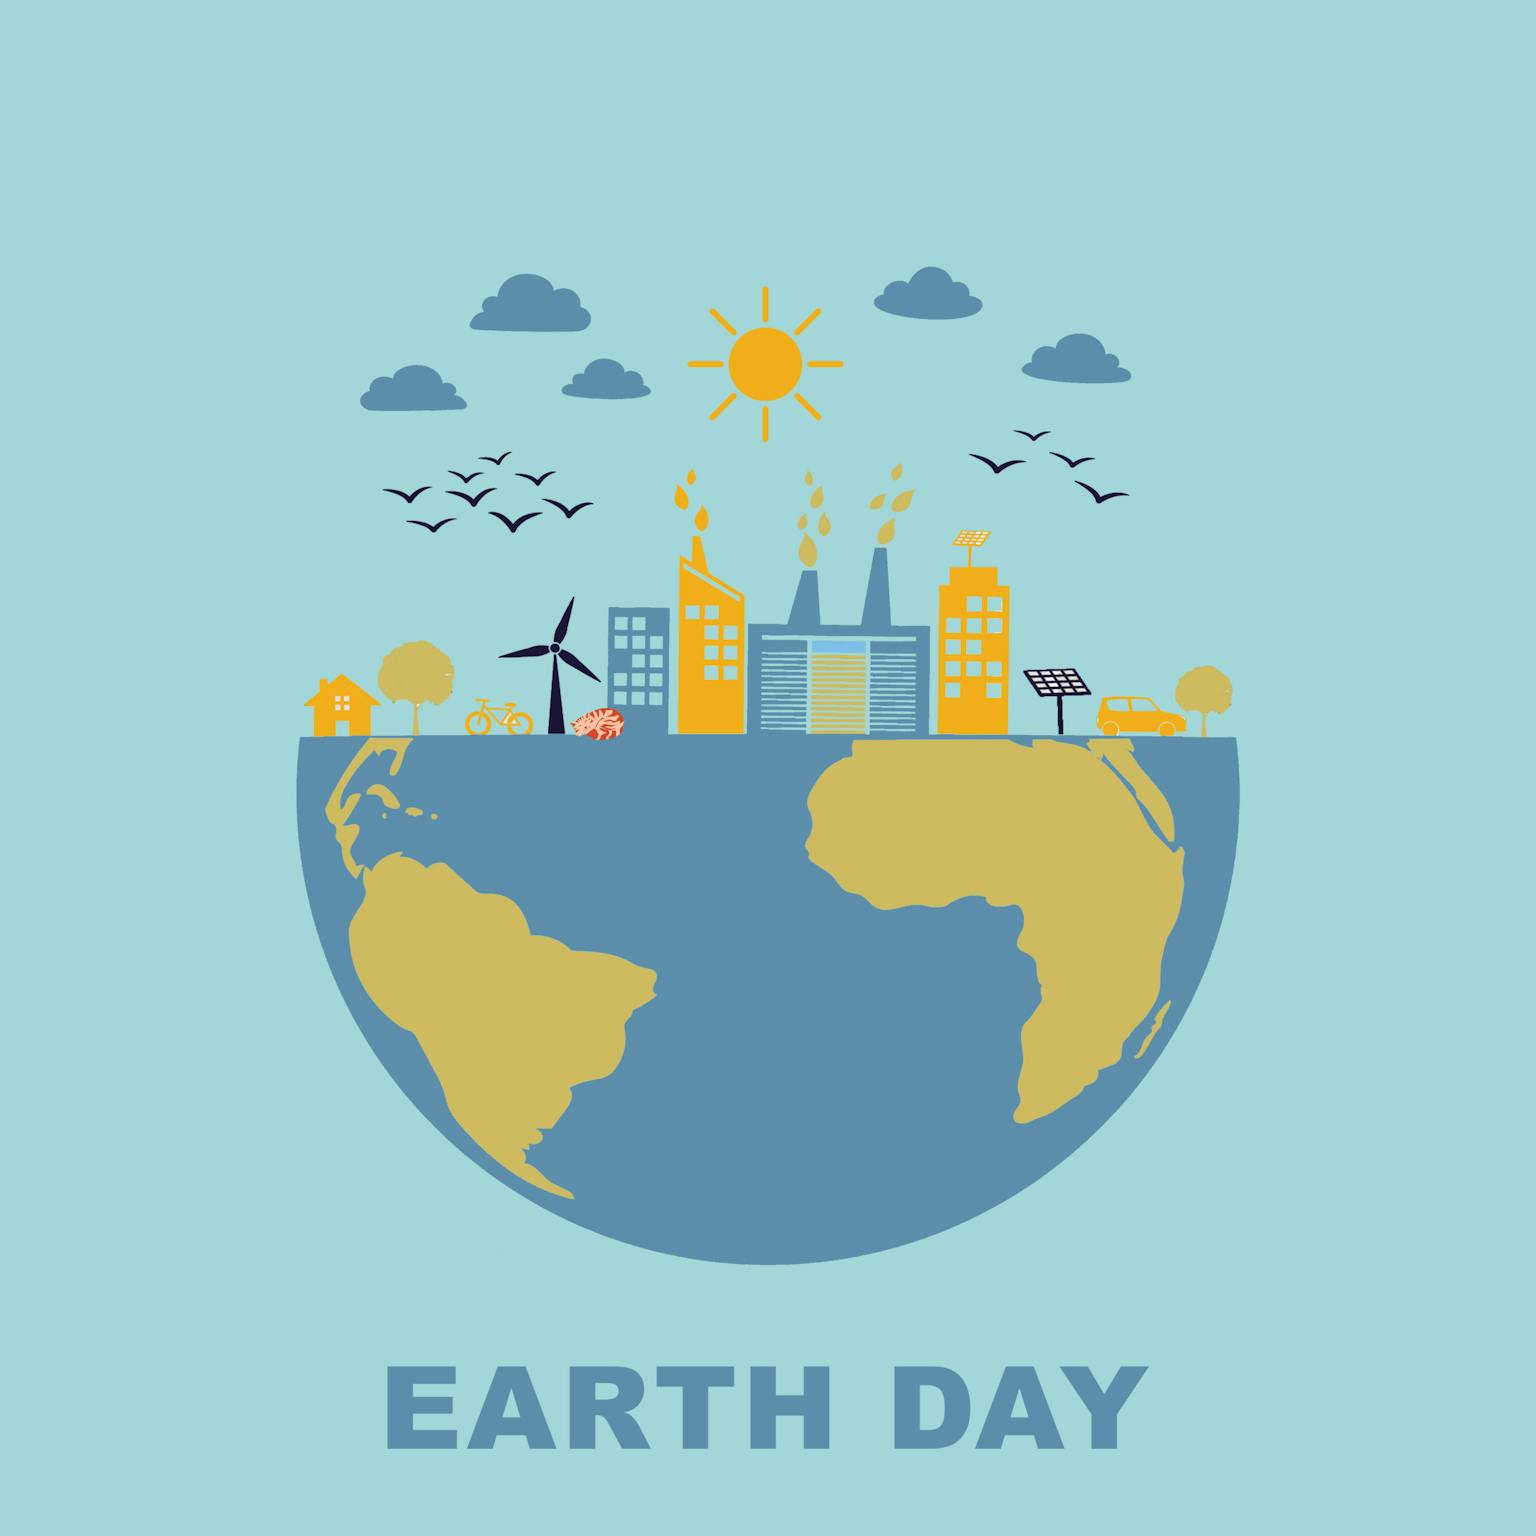 Earth Day 2021 – Is solar the future?